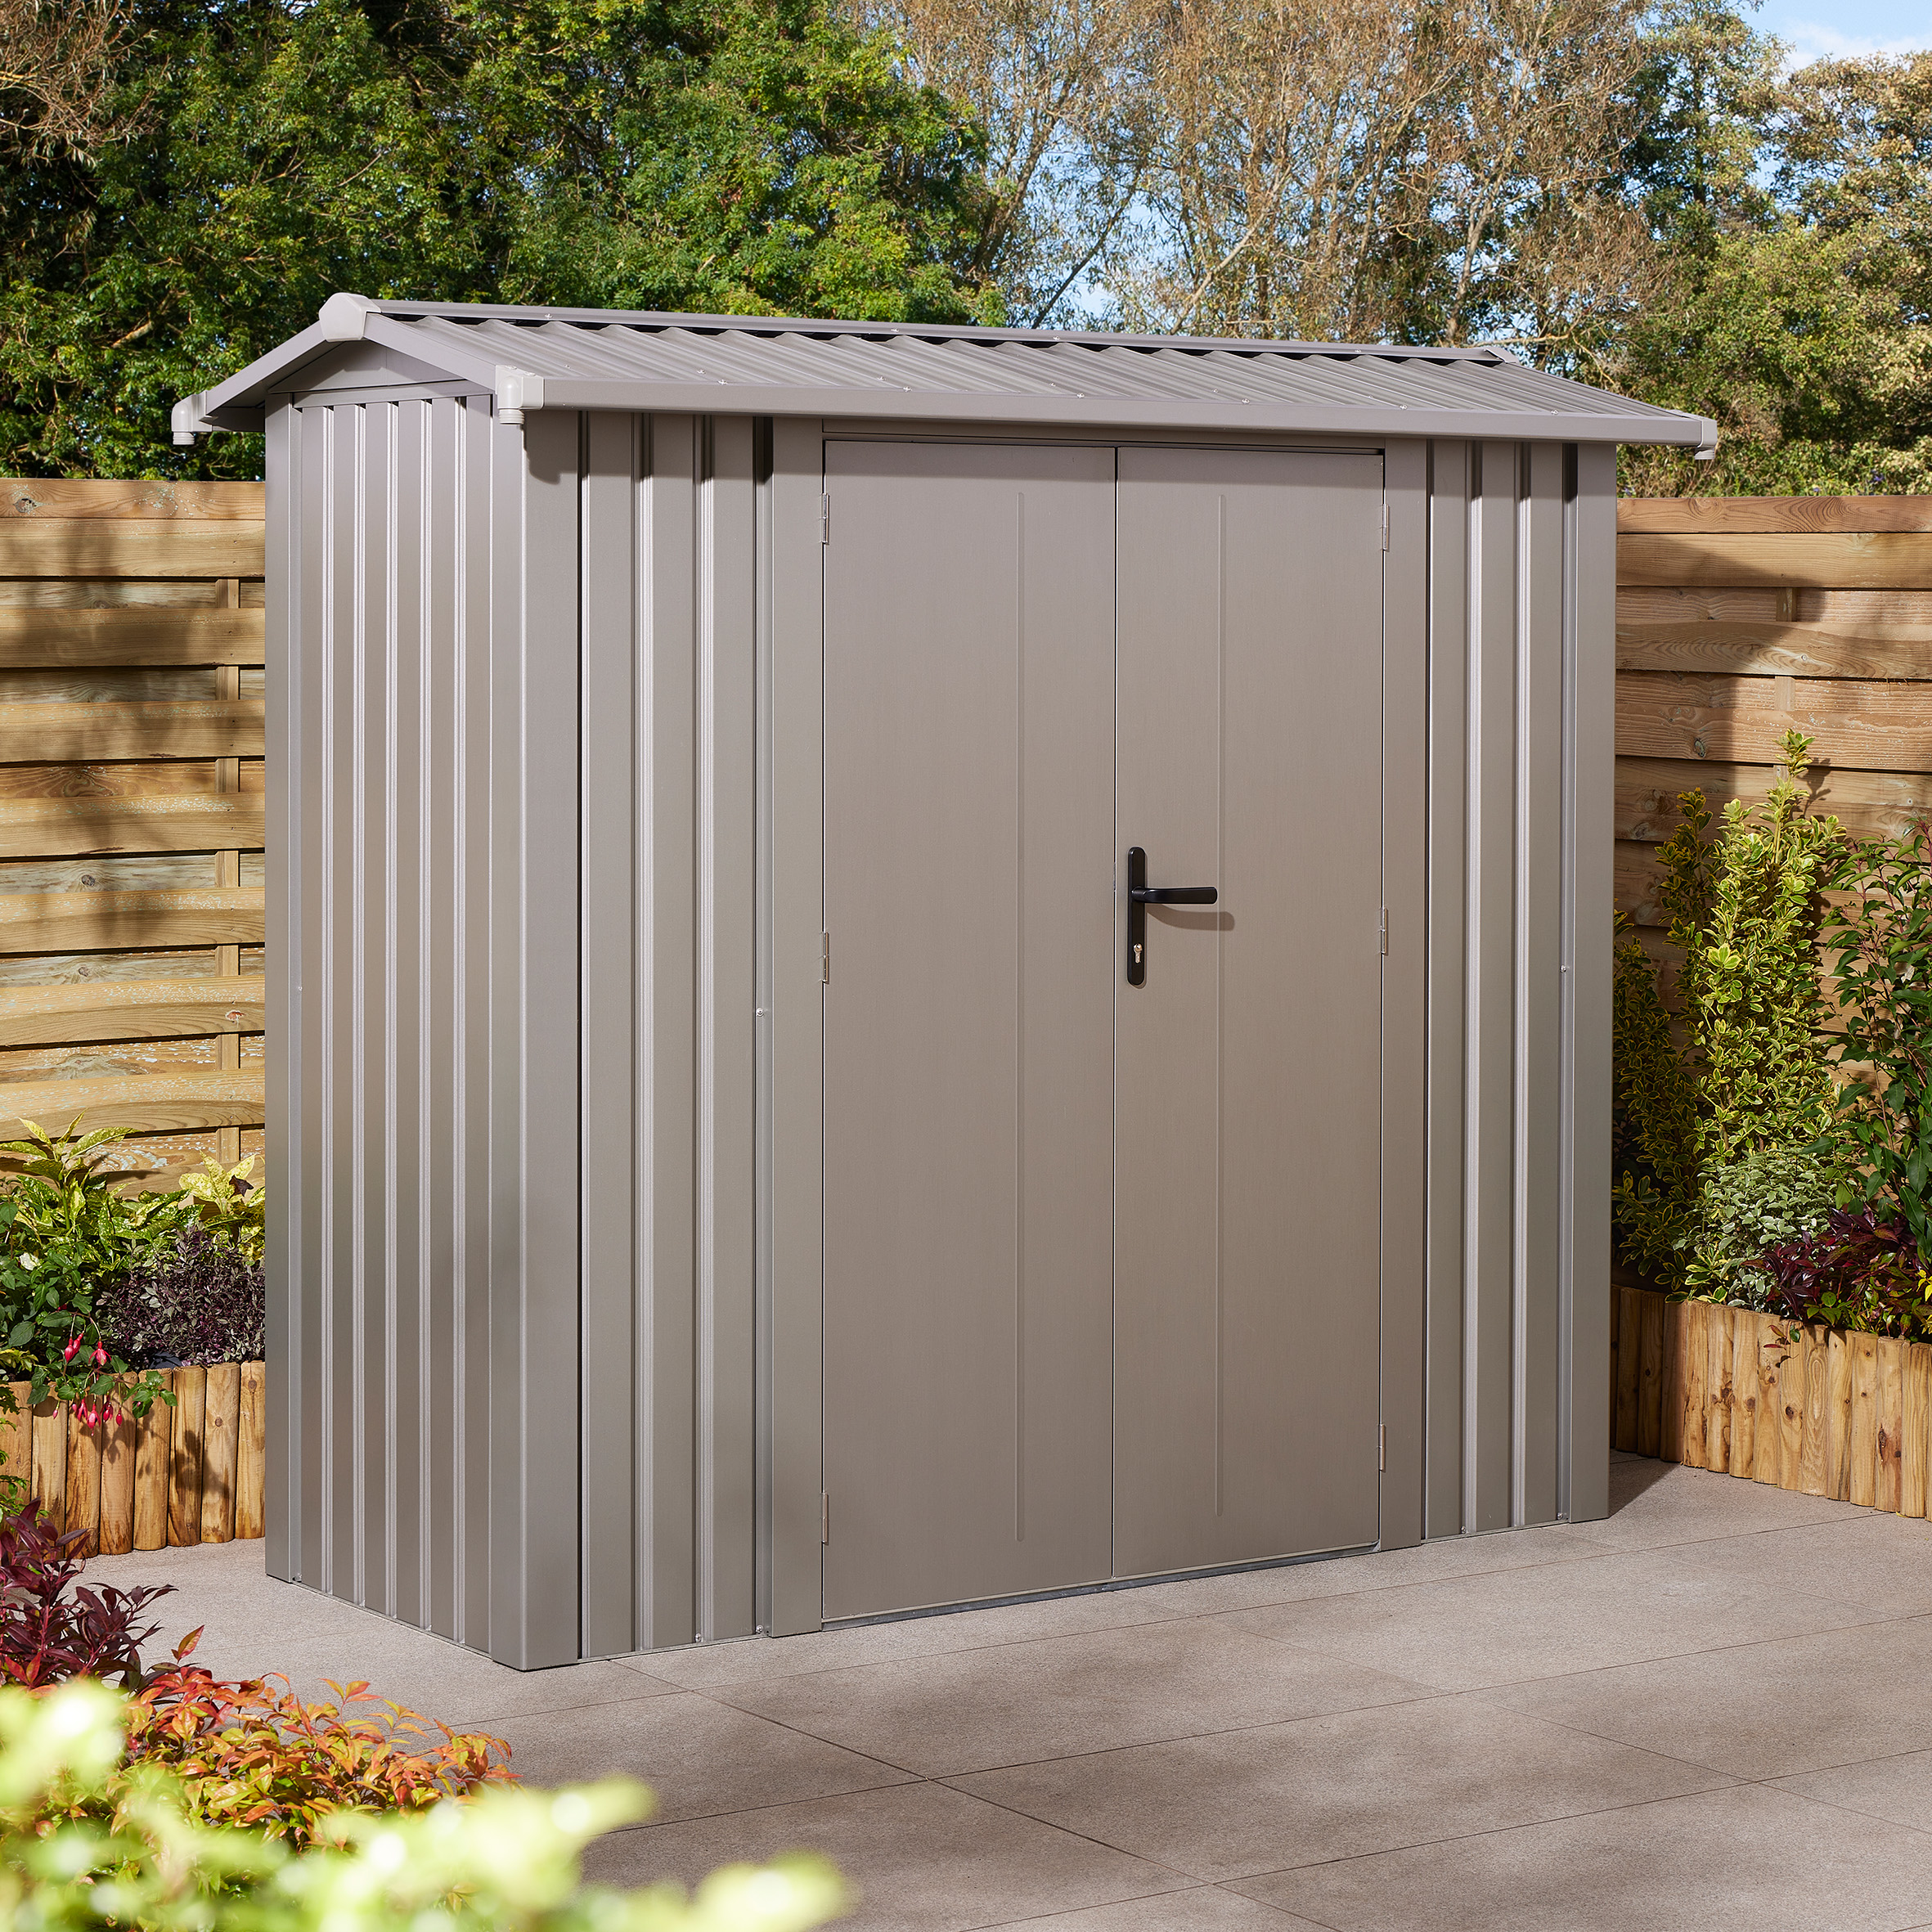 Featured image for “Brentvale Premium 8x4 Metal Shed”